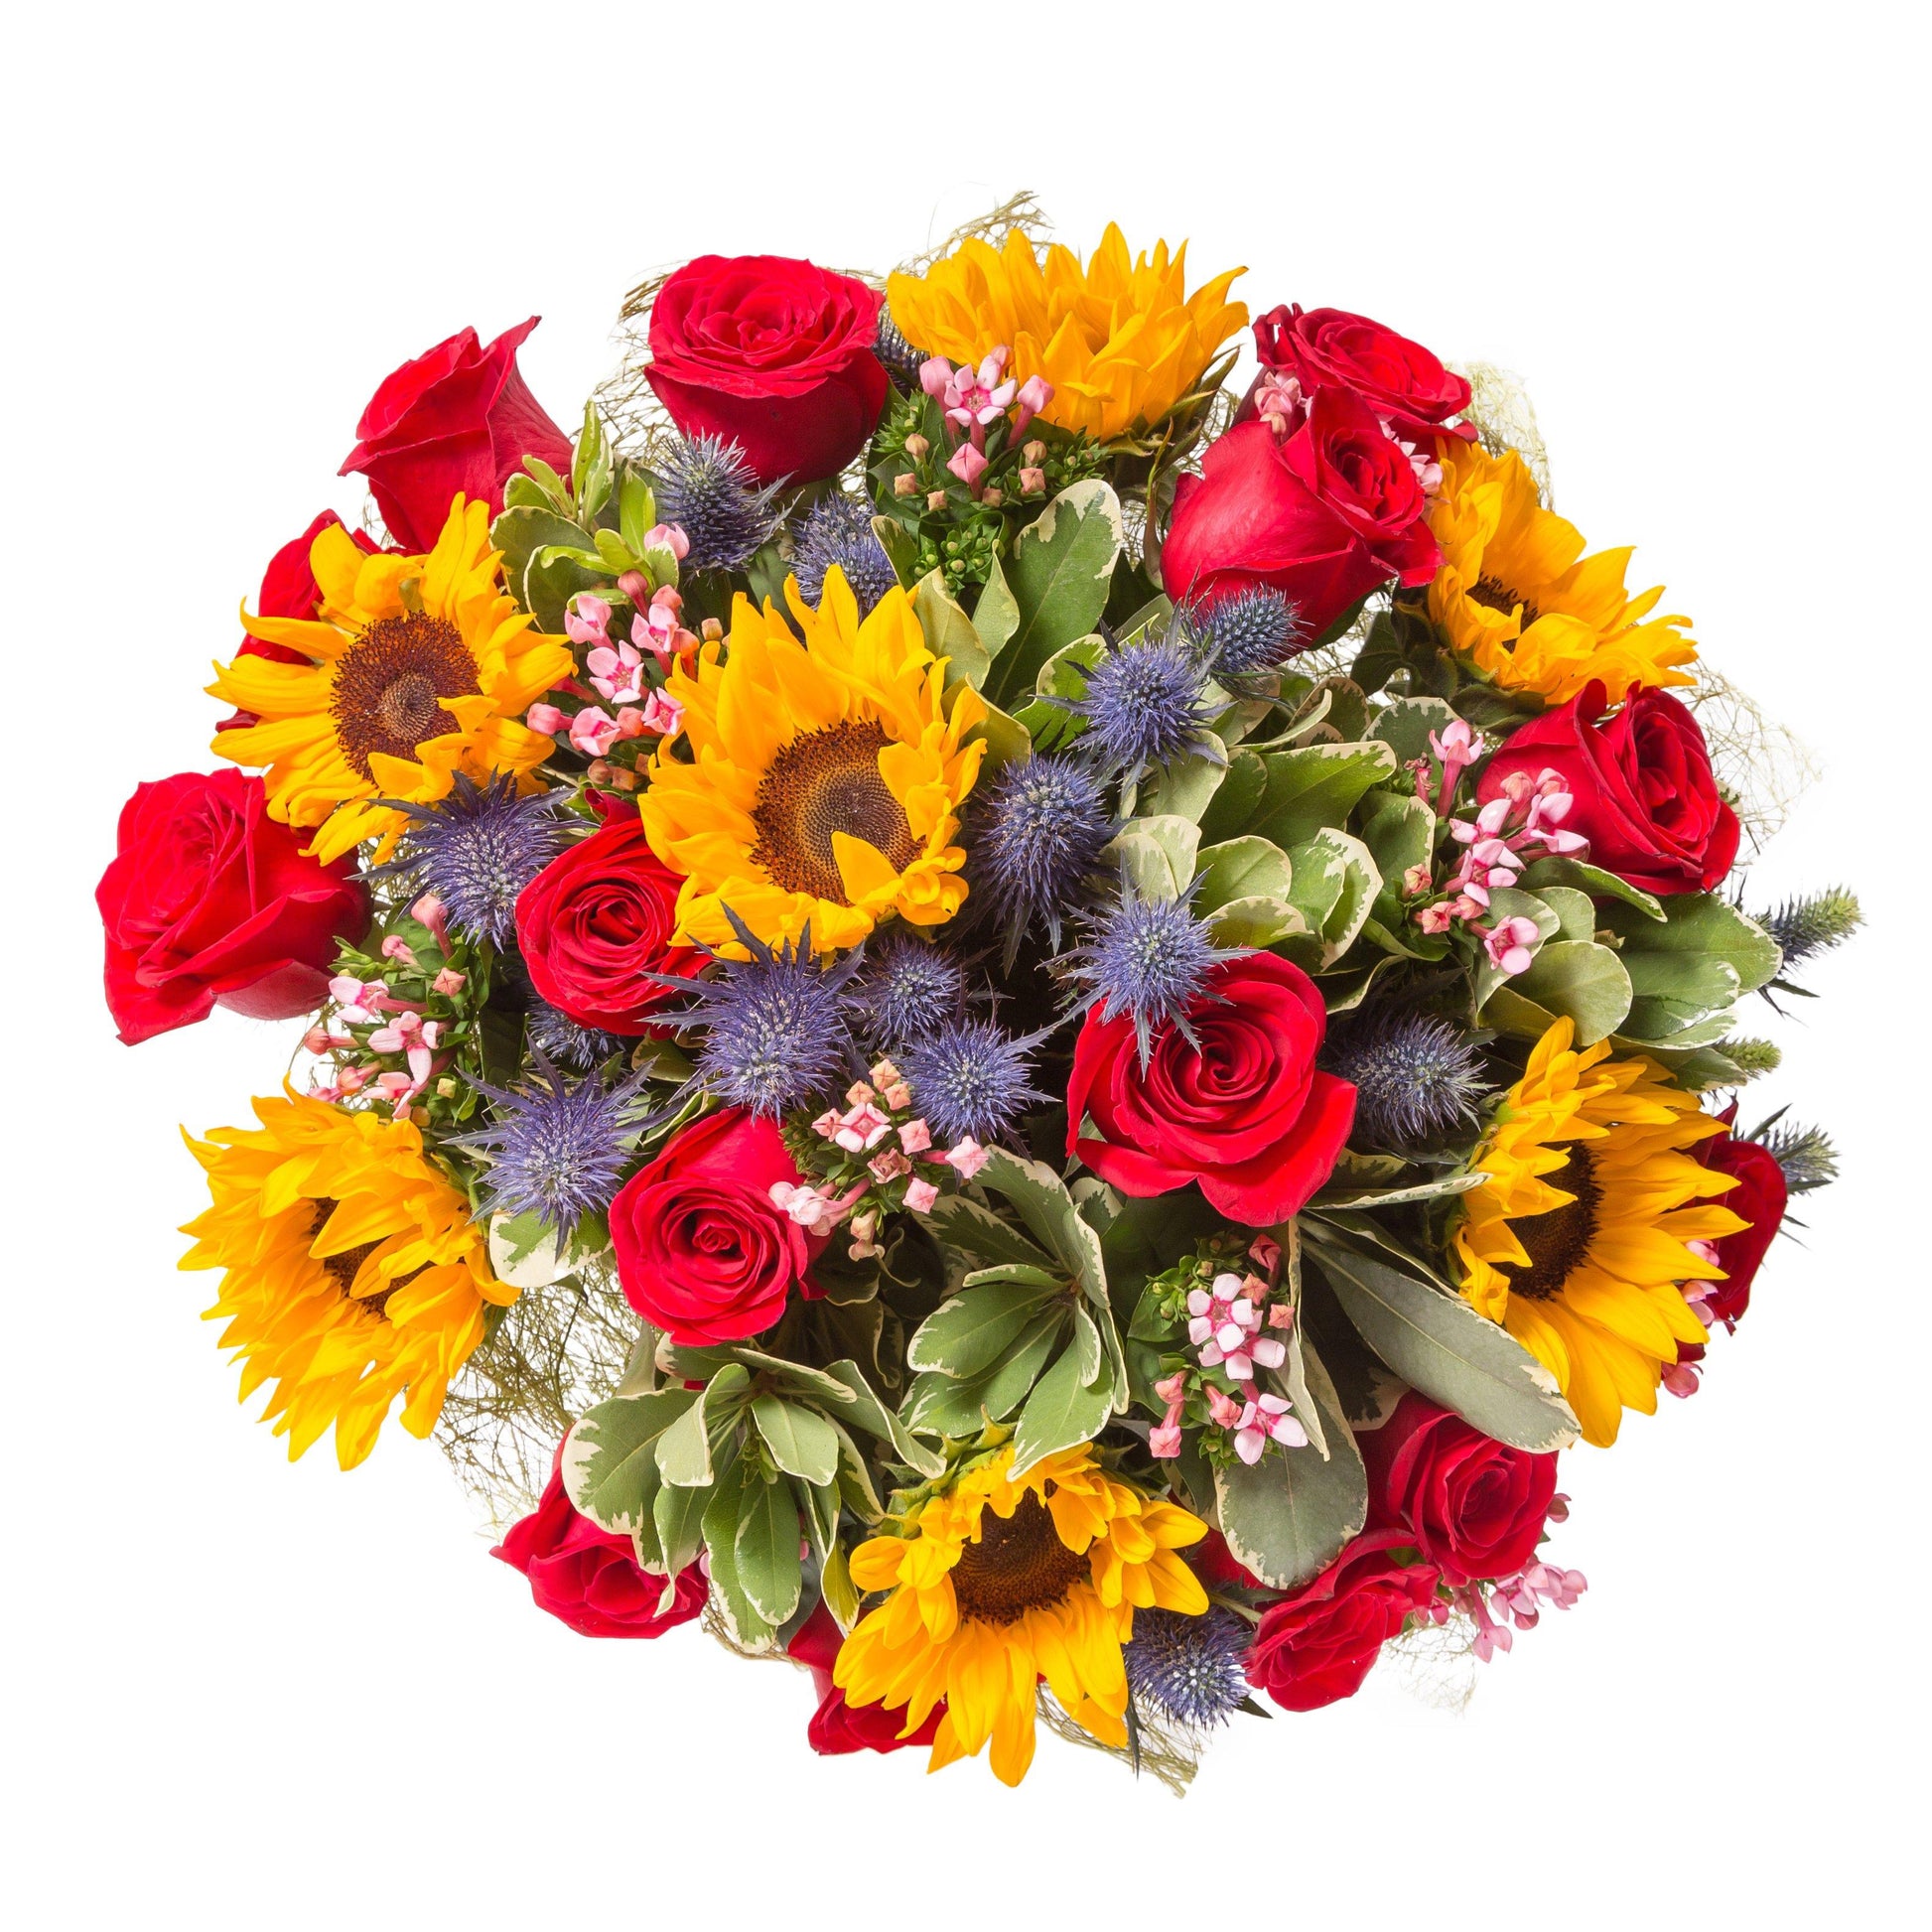 Sunflowers and Roses Bouquet